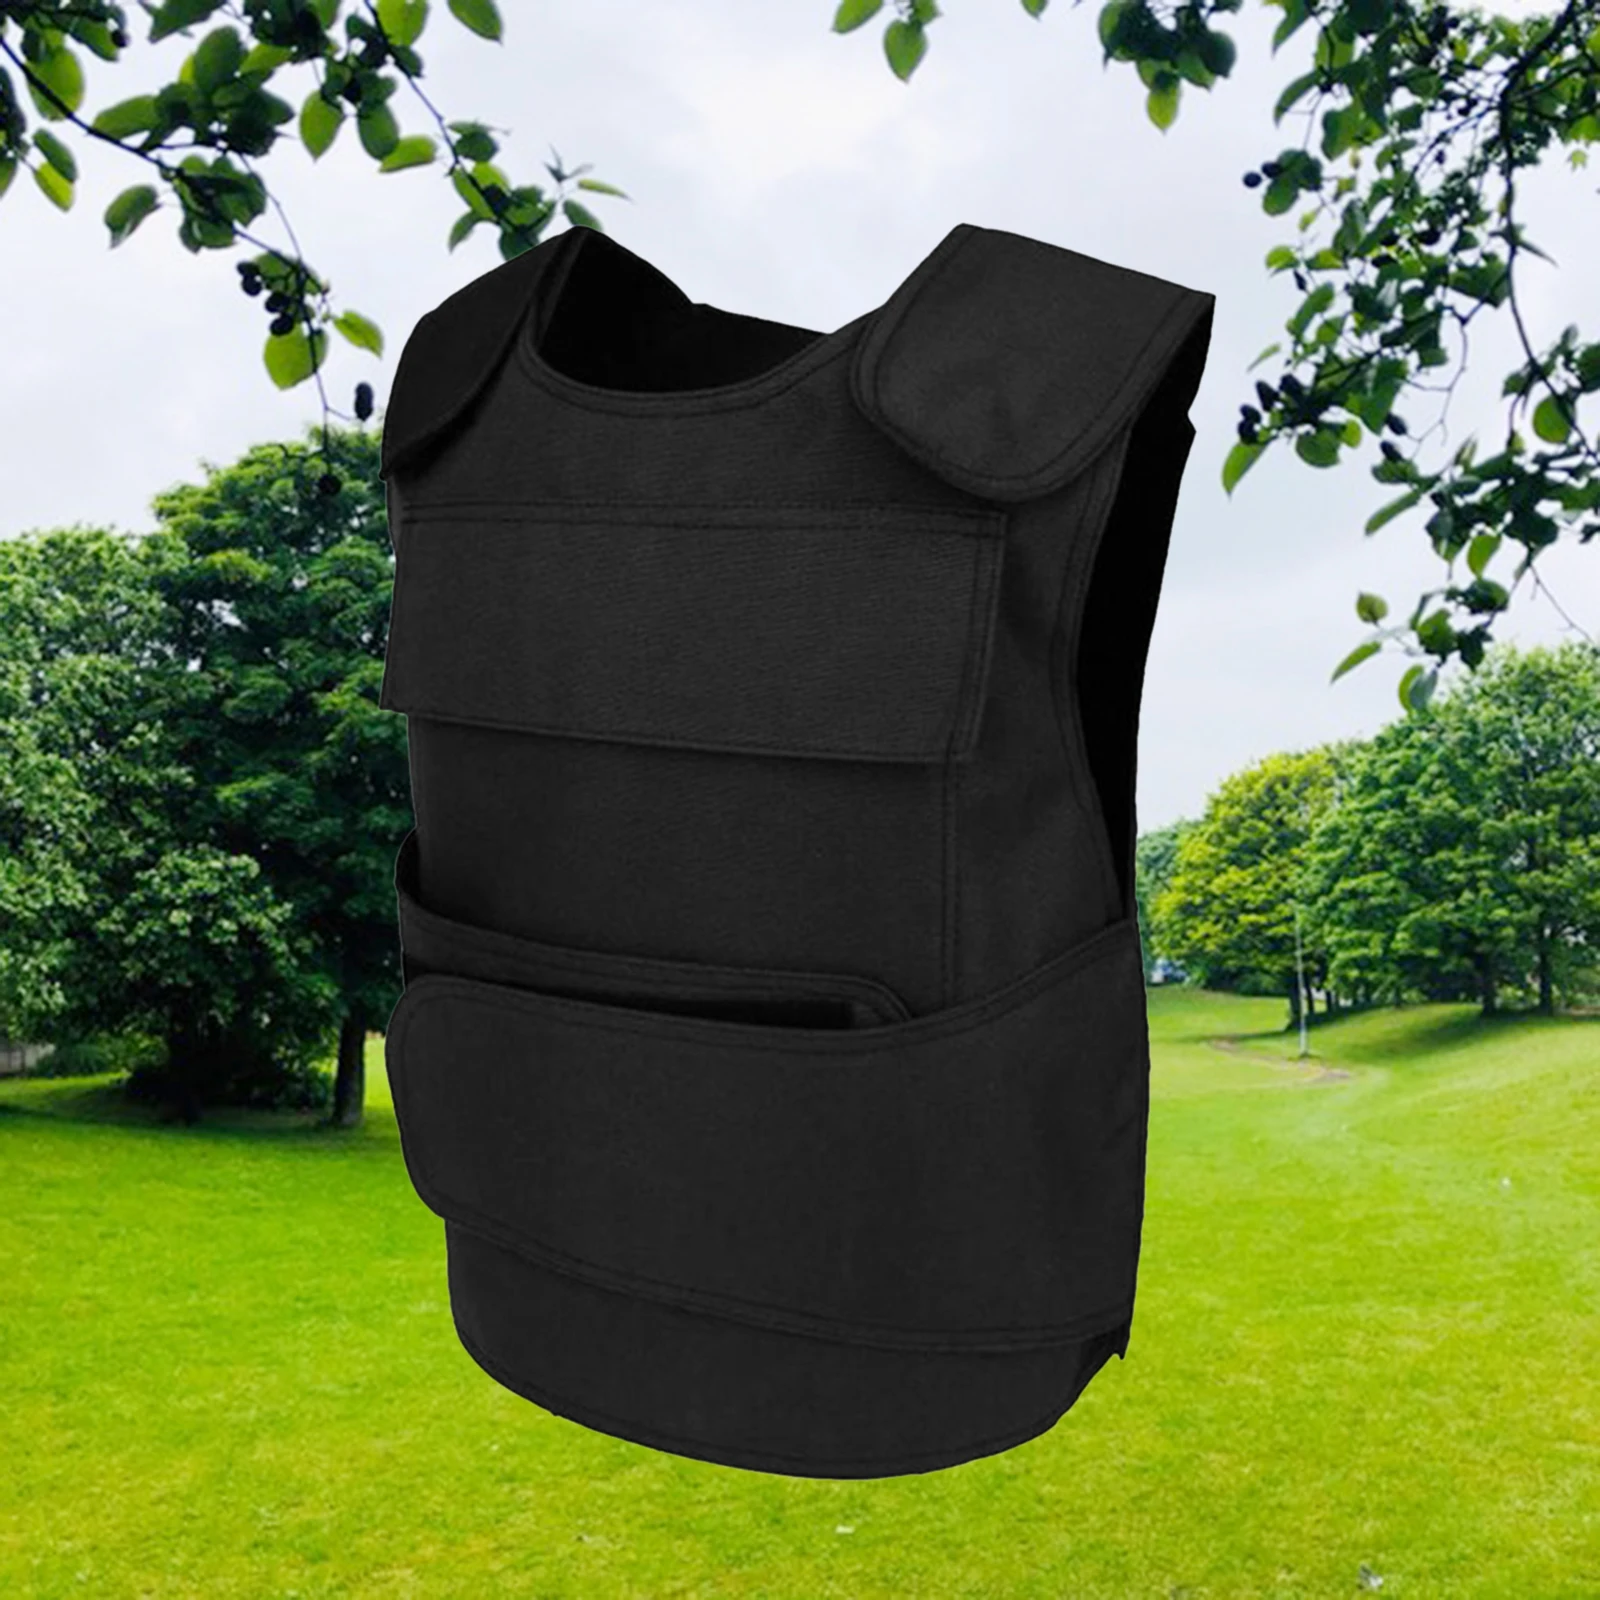  Ultra-Light Breathable Plate Carrier Paintball Training Vests